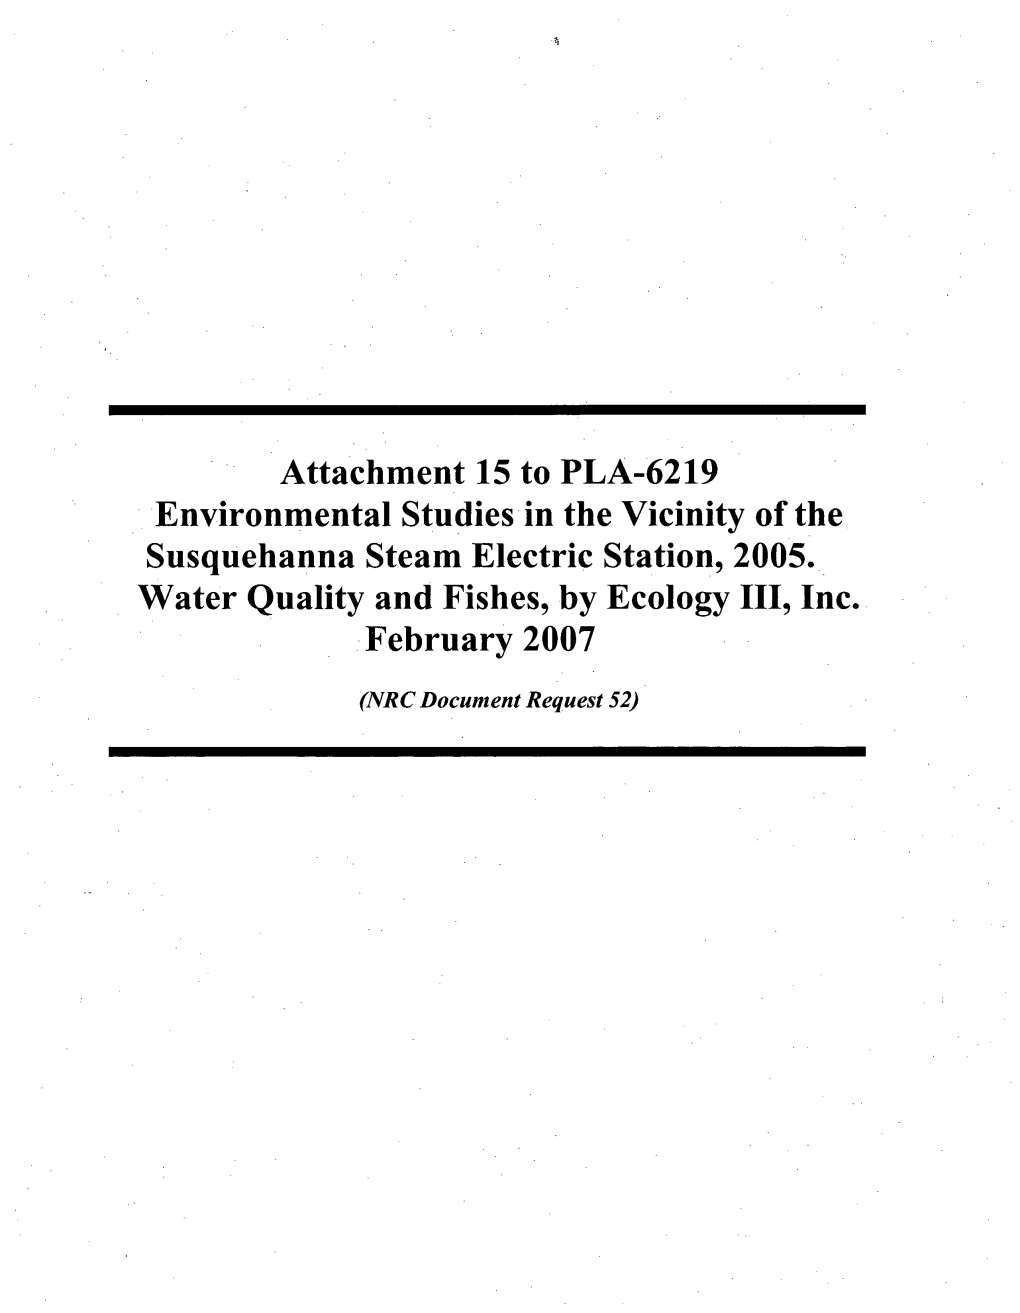 Environmental Studies in the Vicinity of the Susquehanna Steam Electric Station, 2005